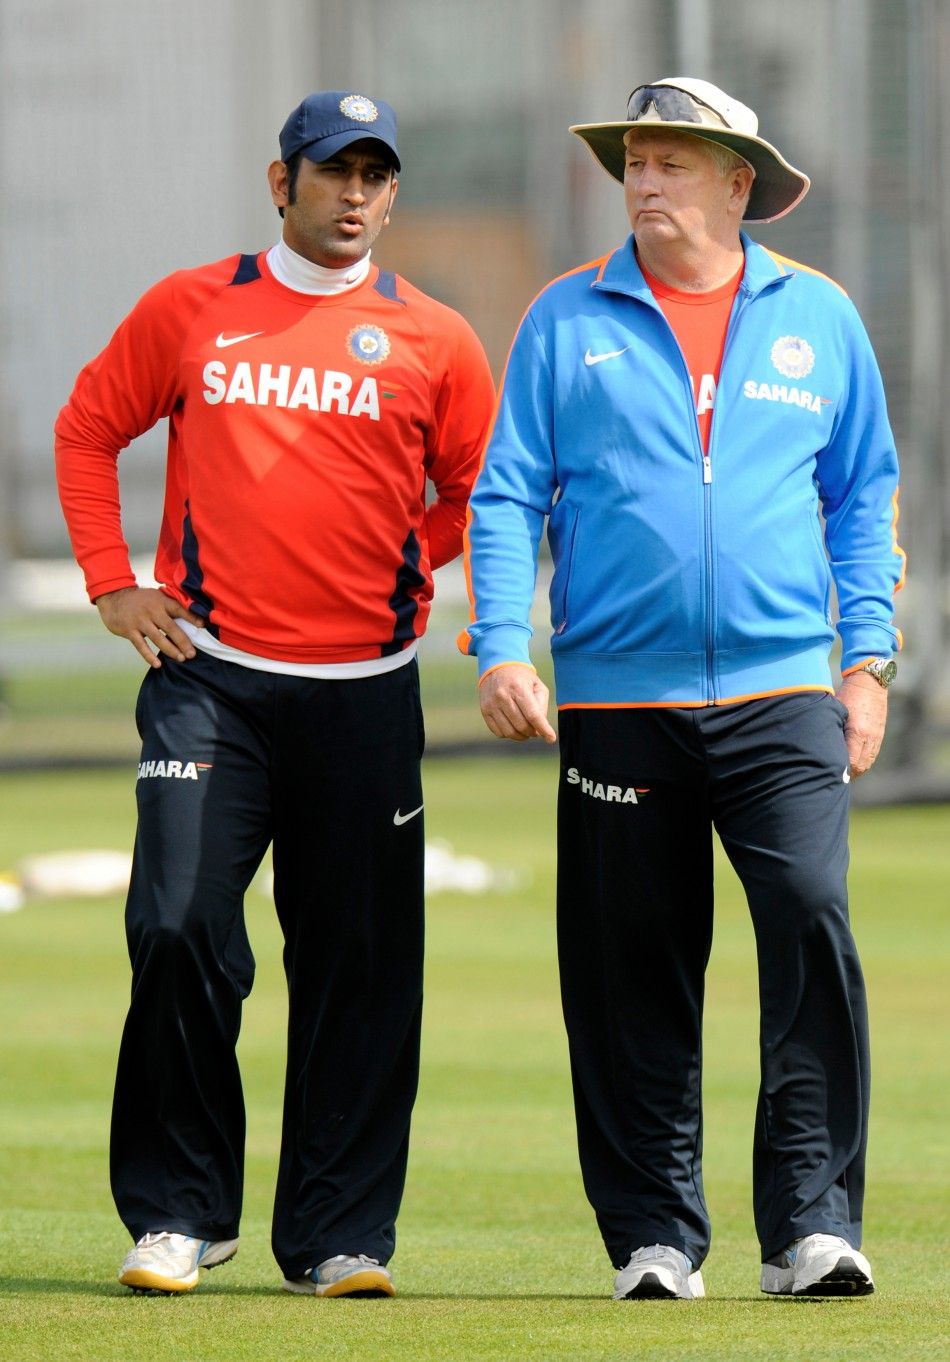 India039s Dhoni talks to Fletcher during a training session before Thursday039s first cricket test match against England at Lord039s.